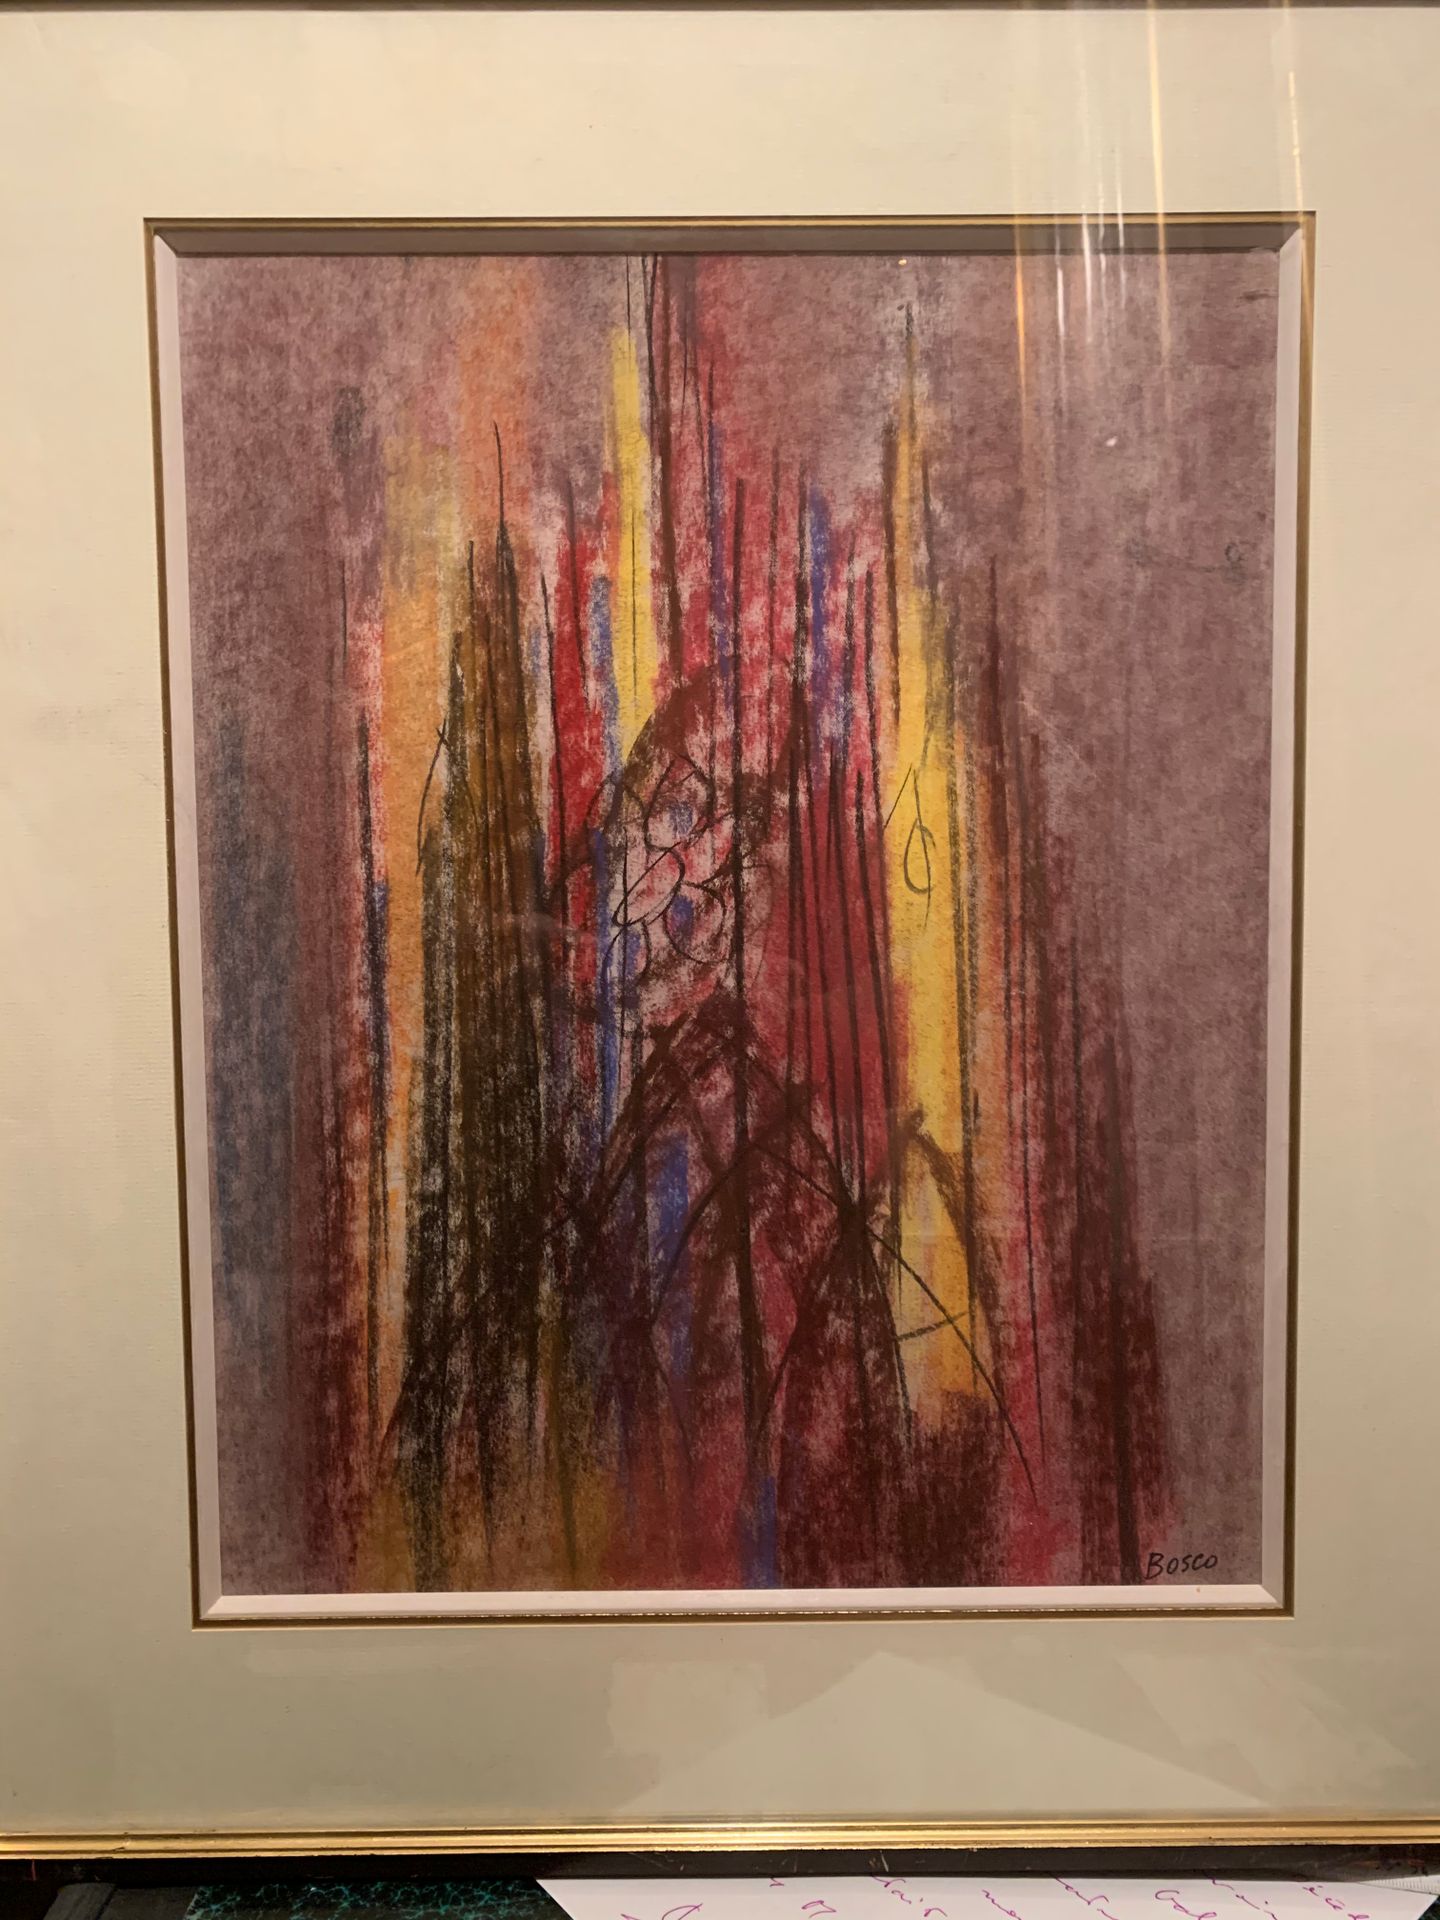 Null Pierre BOSCO (1909-1993)

Untitled

Pastel signed lower right

39 x 31,5 cm